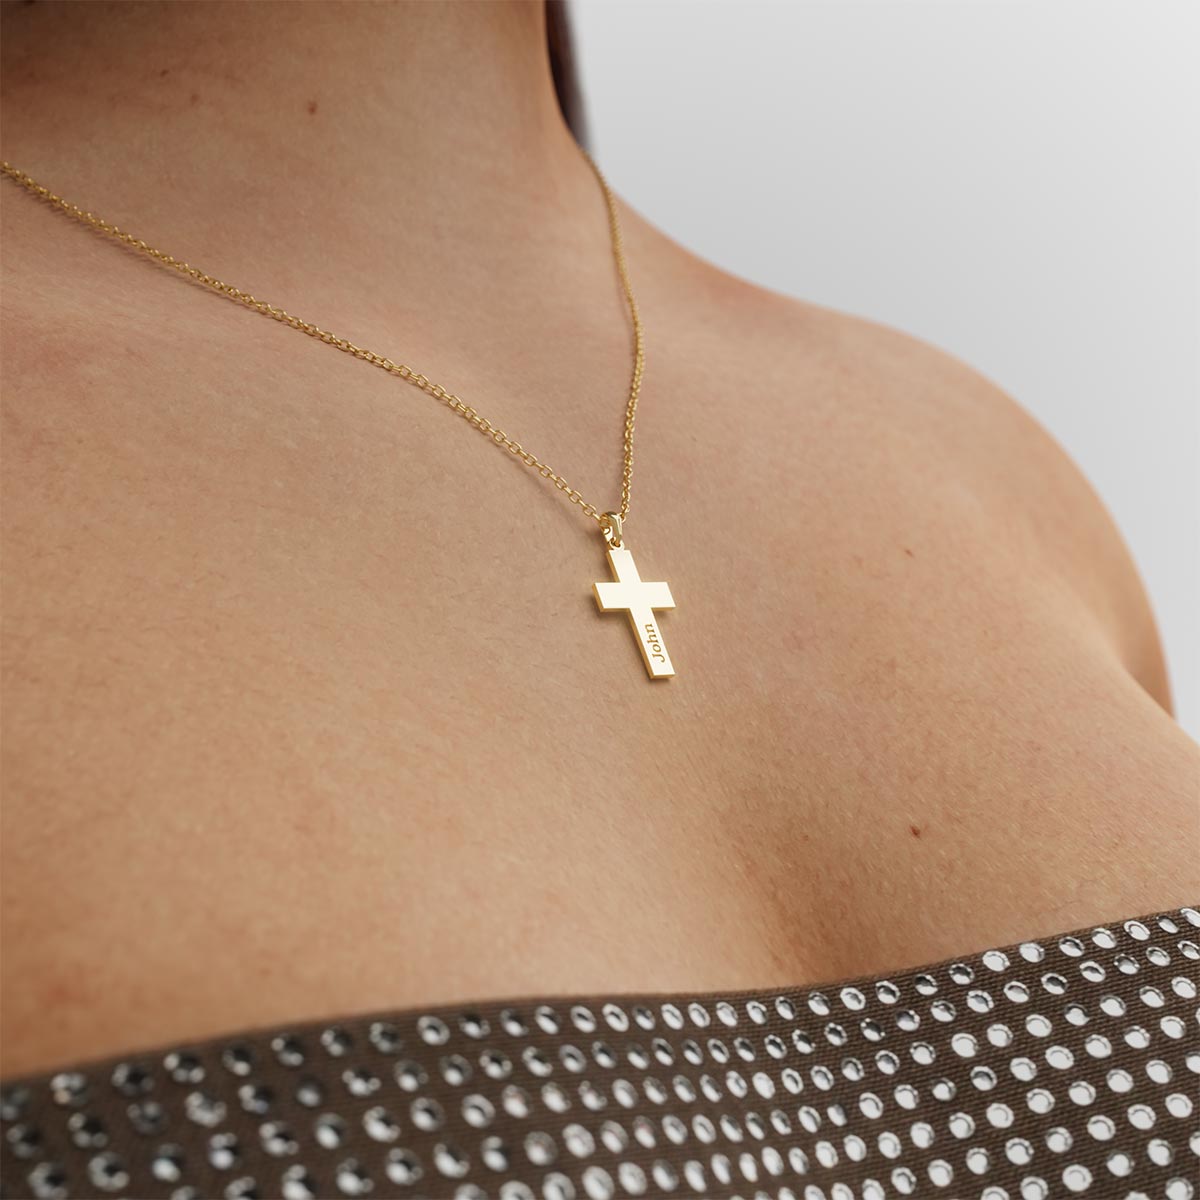 Personalized Modern Cross Necklace with Vertical Name Engraving